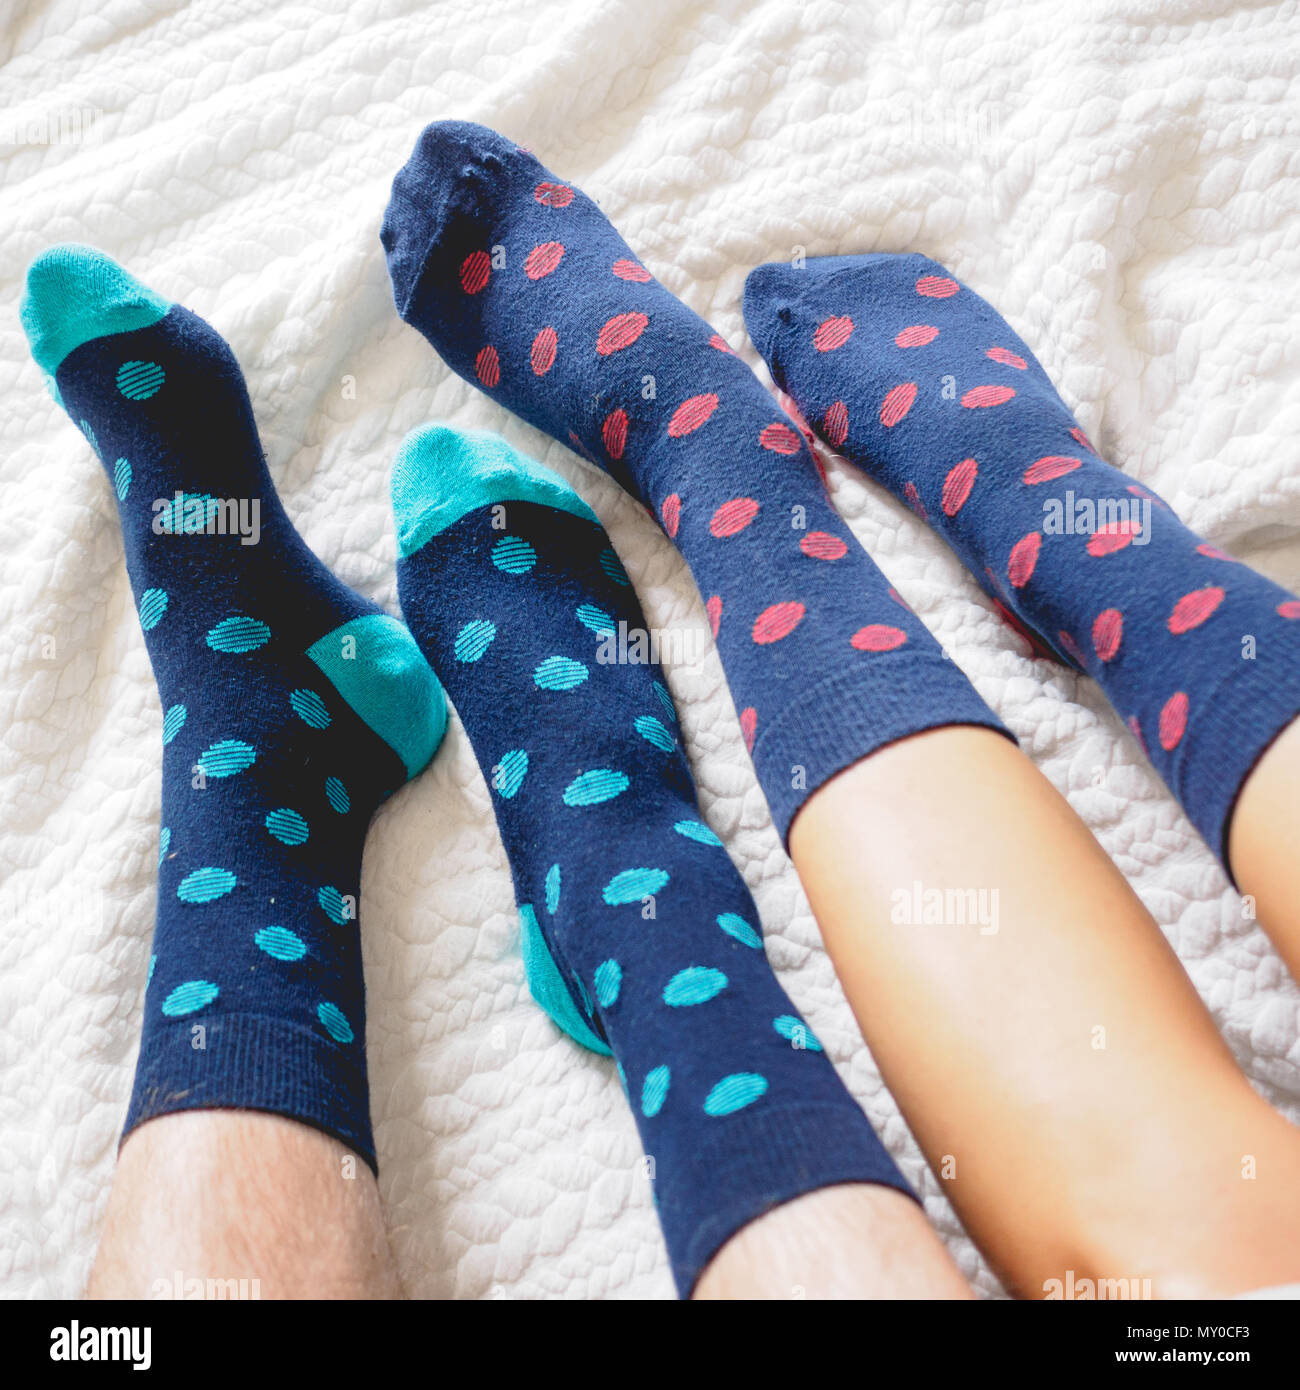 London, UK - November 2017. Young couple posing for a selfie feet wearing blue and white polka dotted socks. Square format. Stock Photo